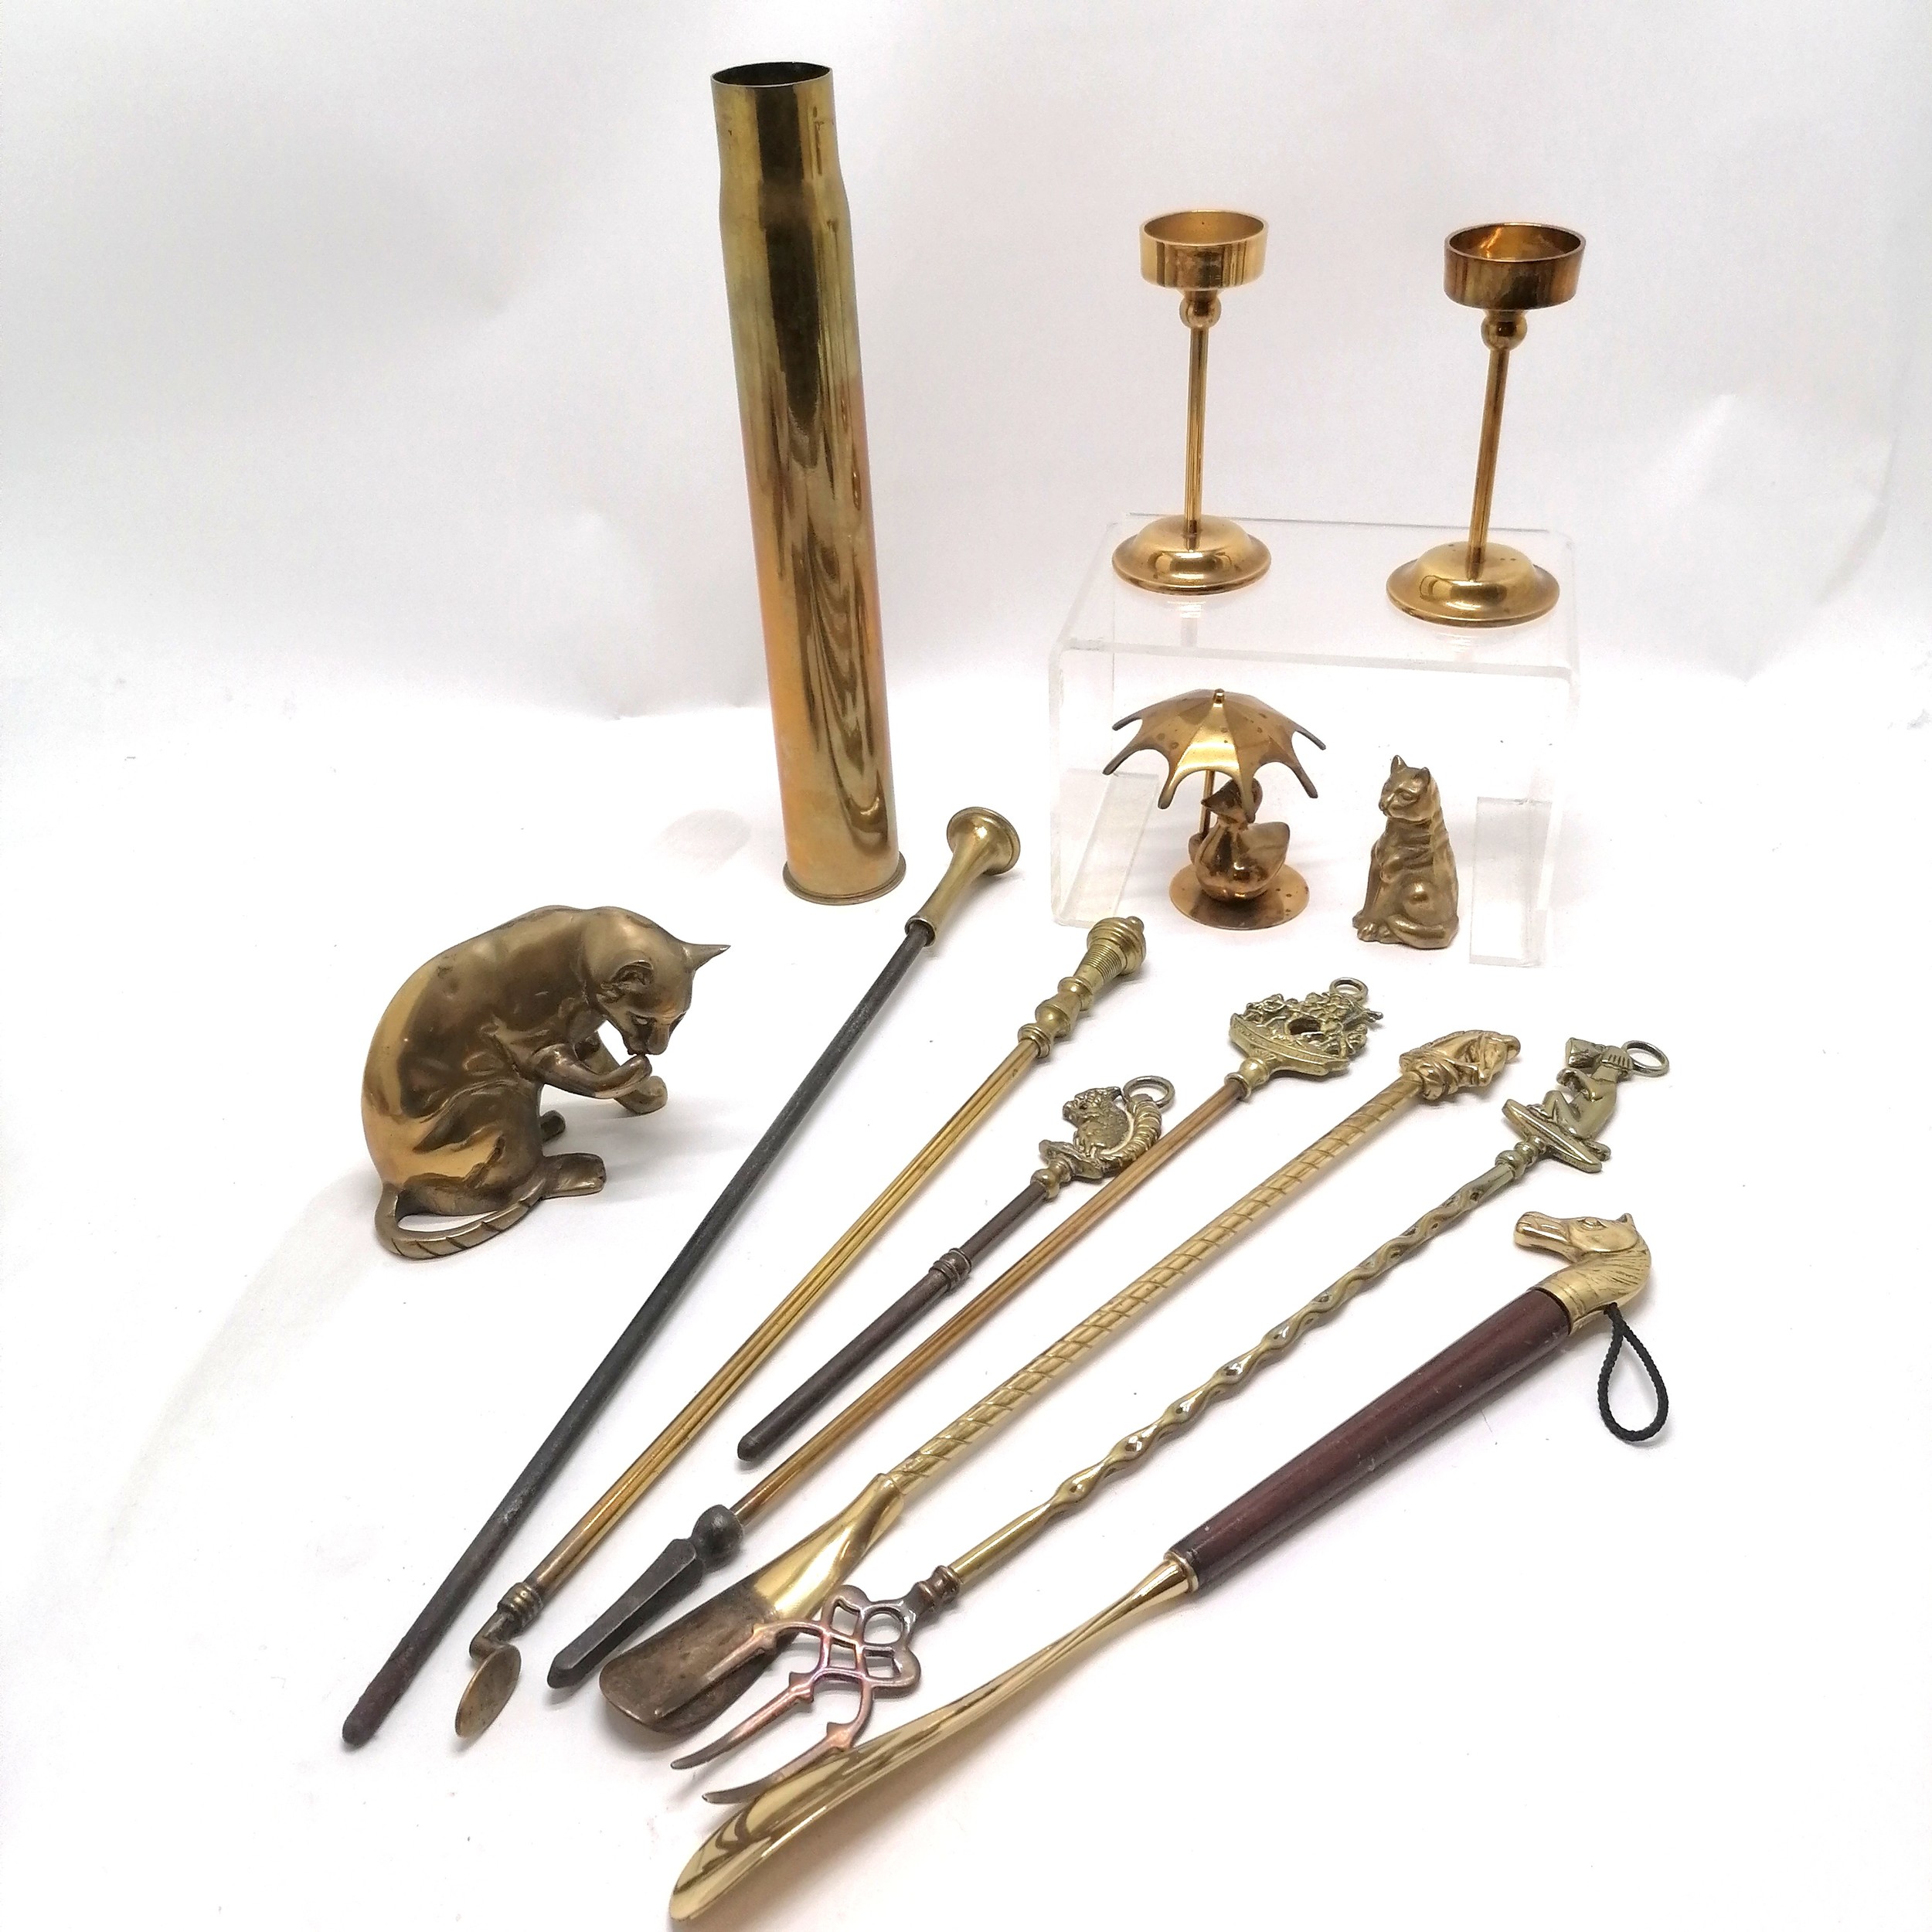 1919 brass shell case, 2 horse head shoe horns, 2 pokers, dog toasting fork, 2 brass cats tallest